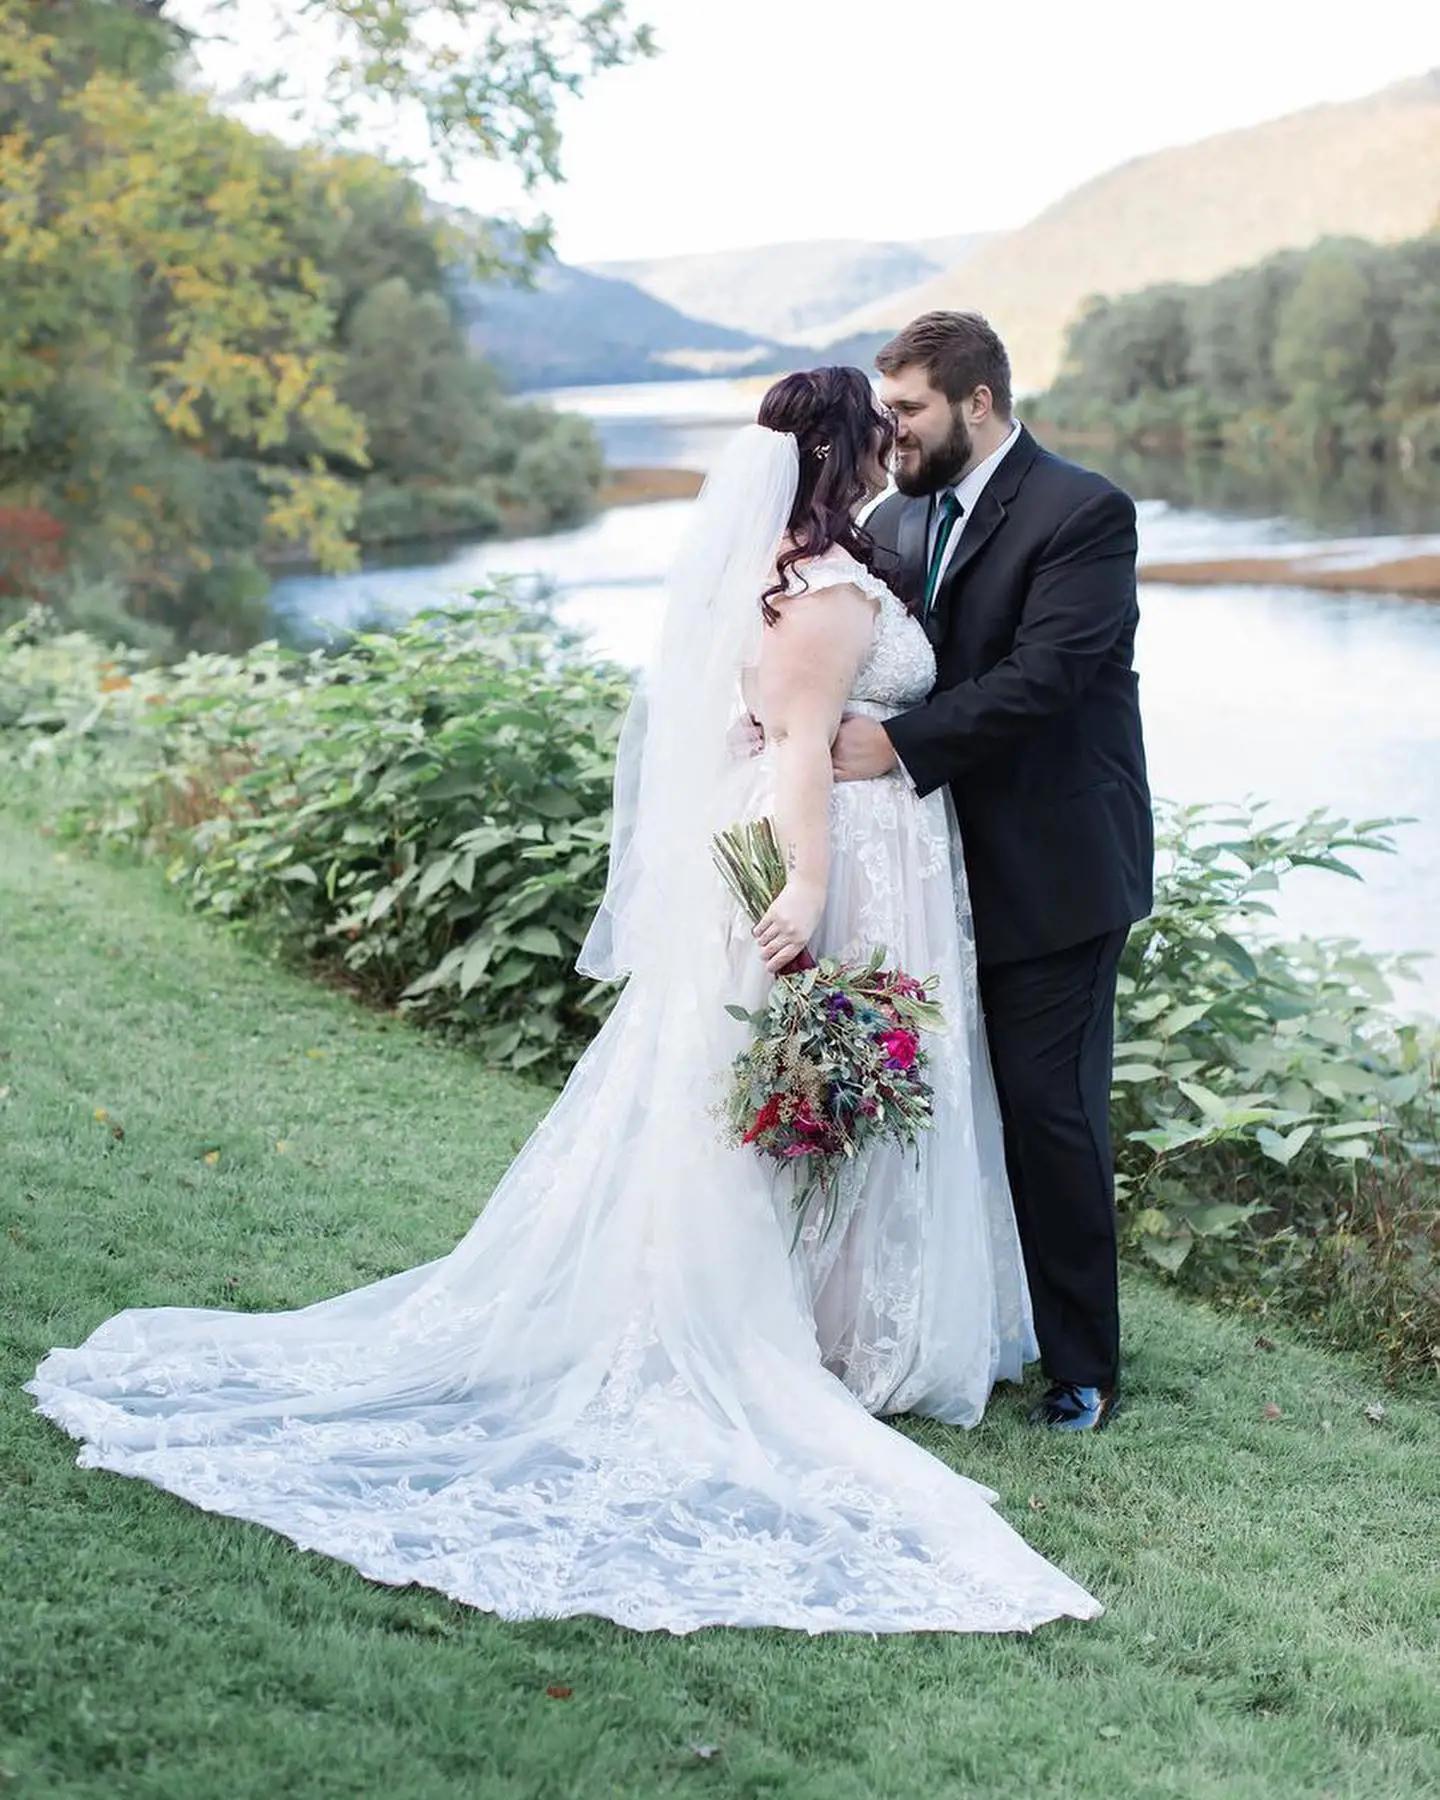 Сouple wearing a white gown and a black suit on the grass